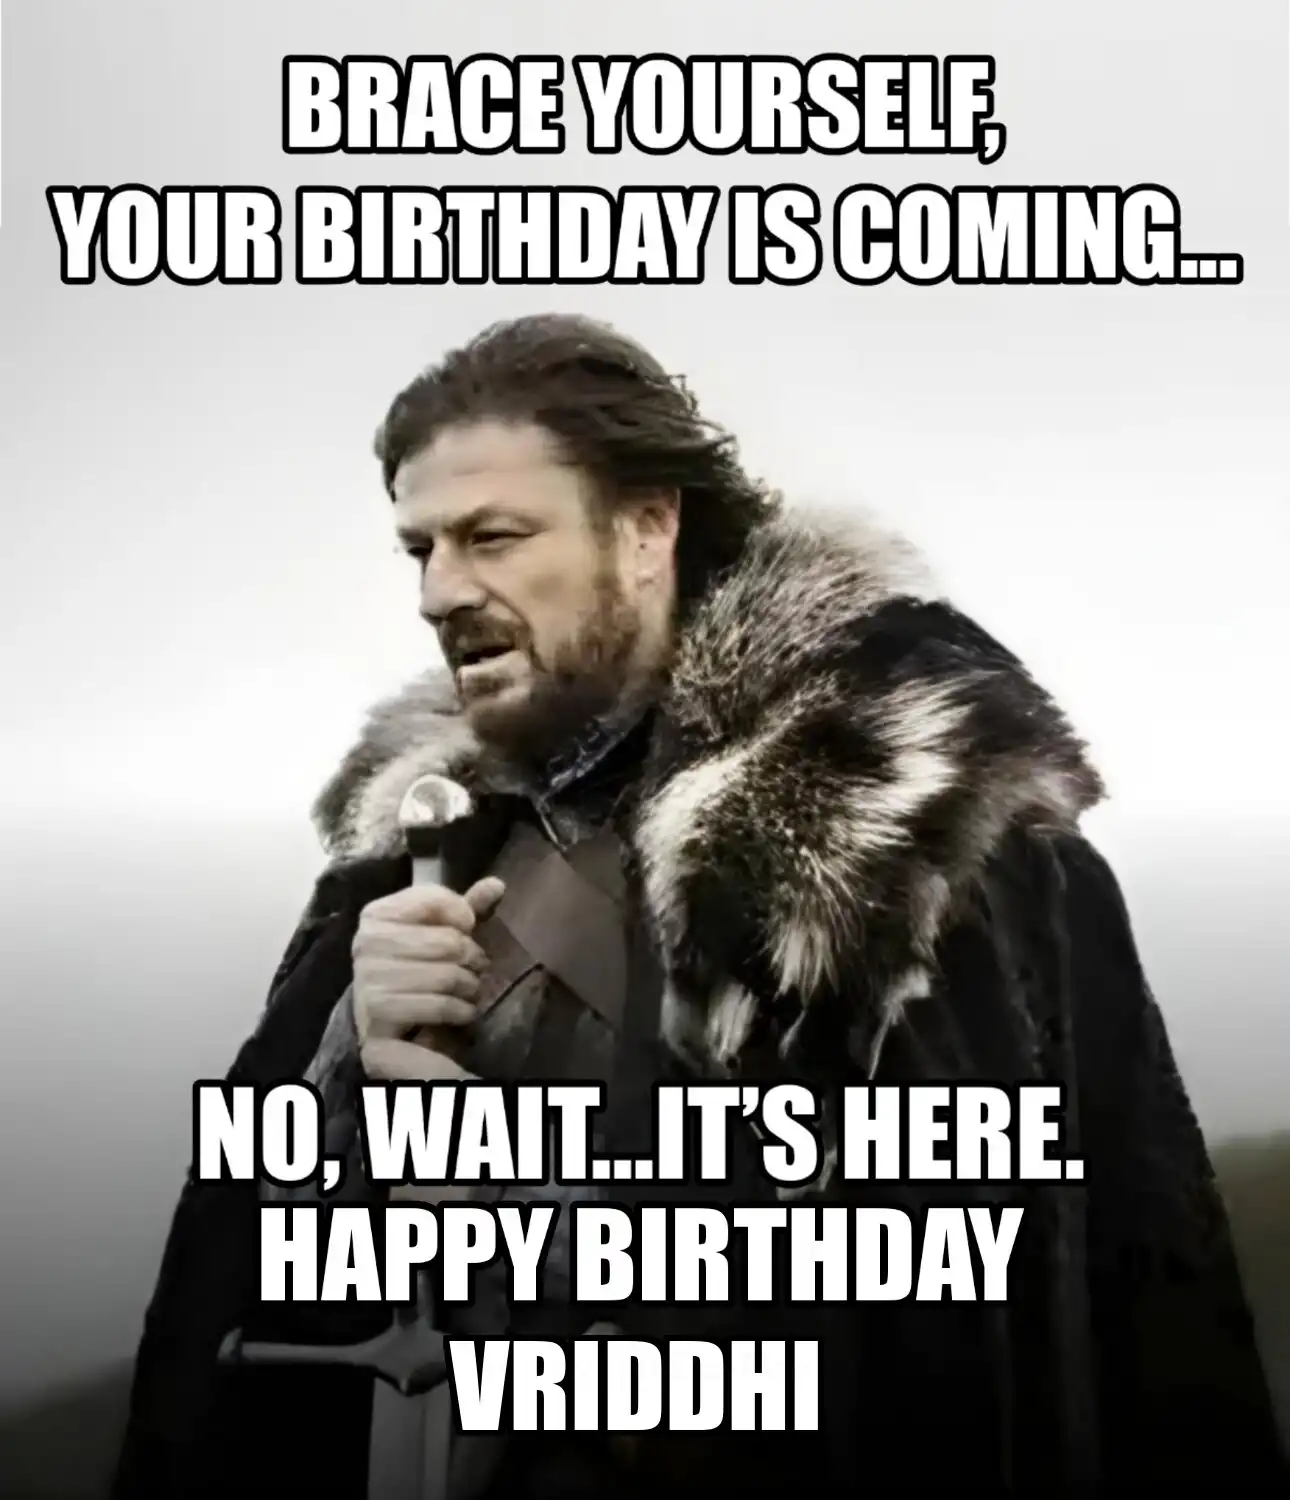 Happy Birthday Vriddhi Brace Yourself Your Birthday Is Coming Meme